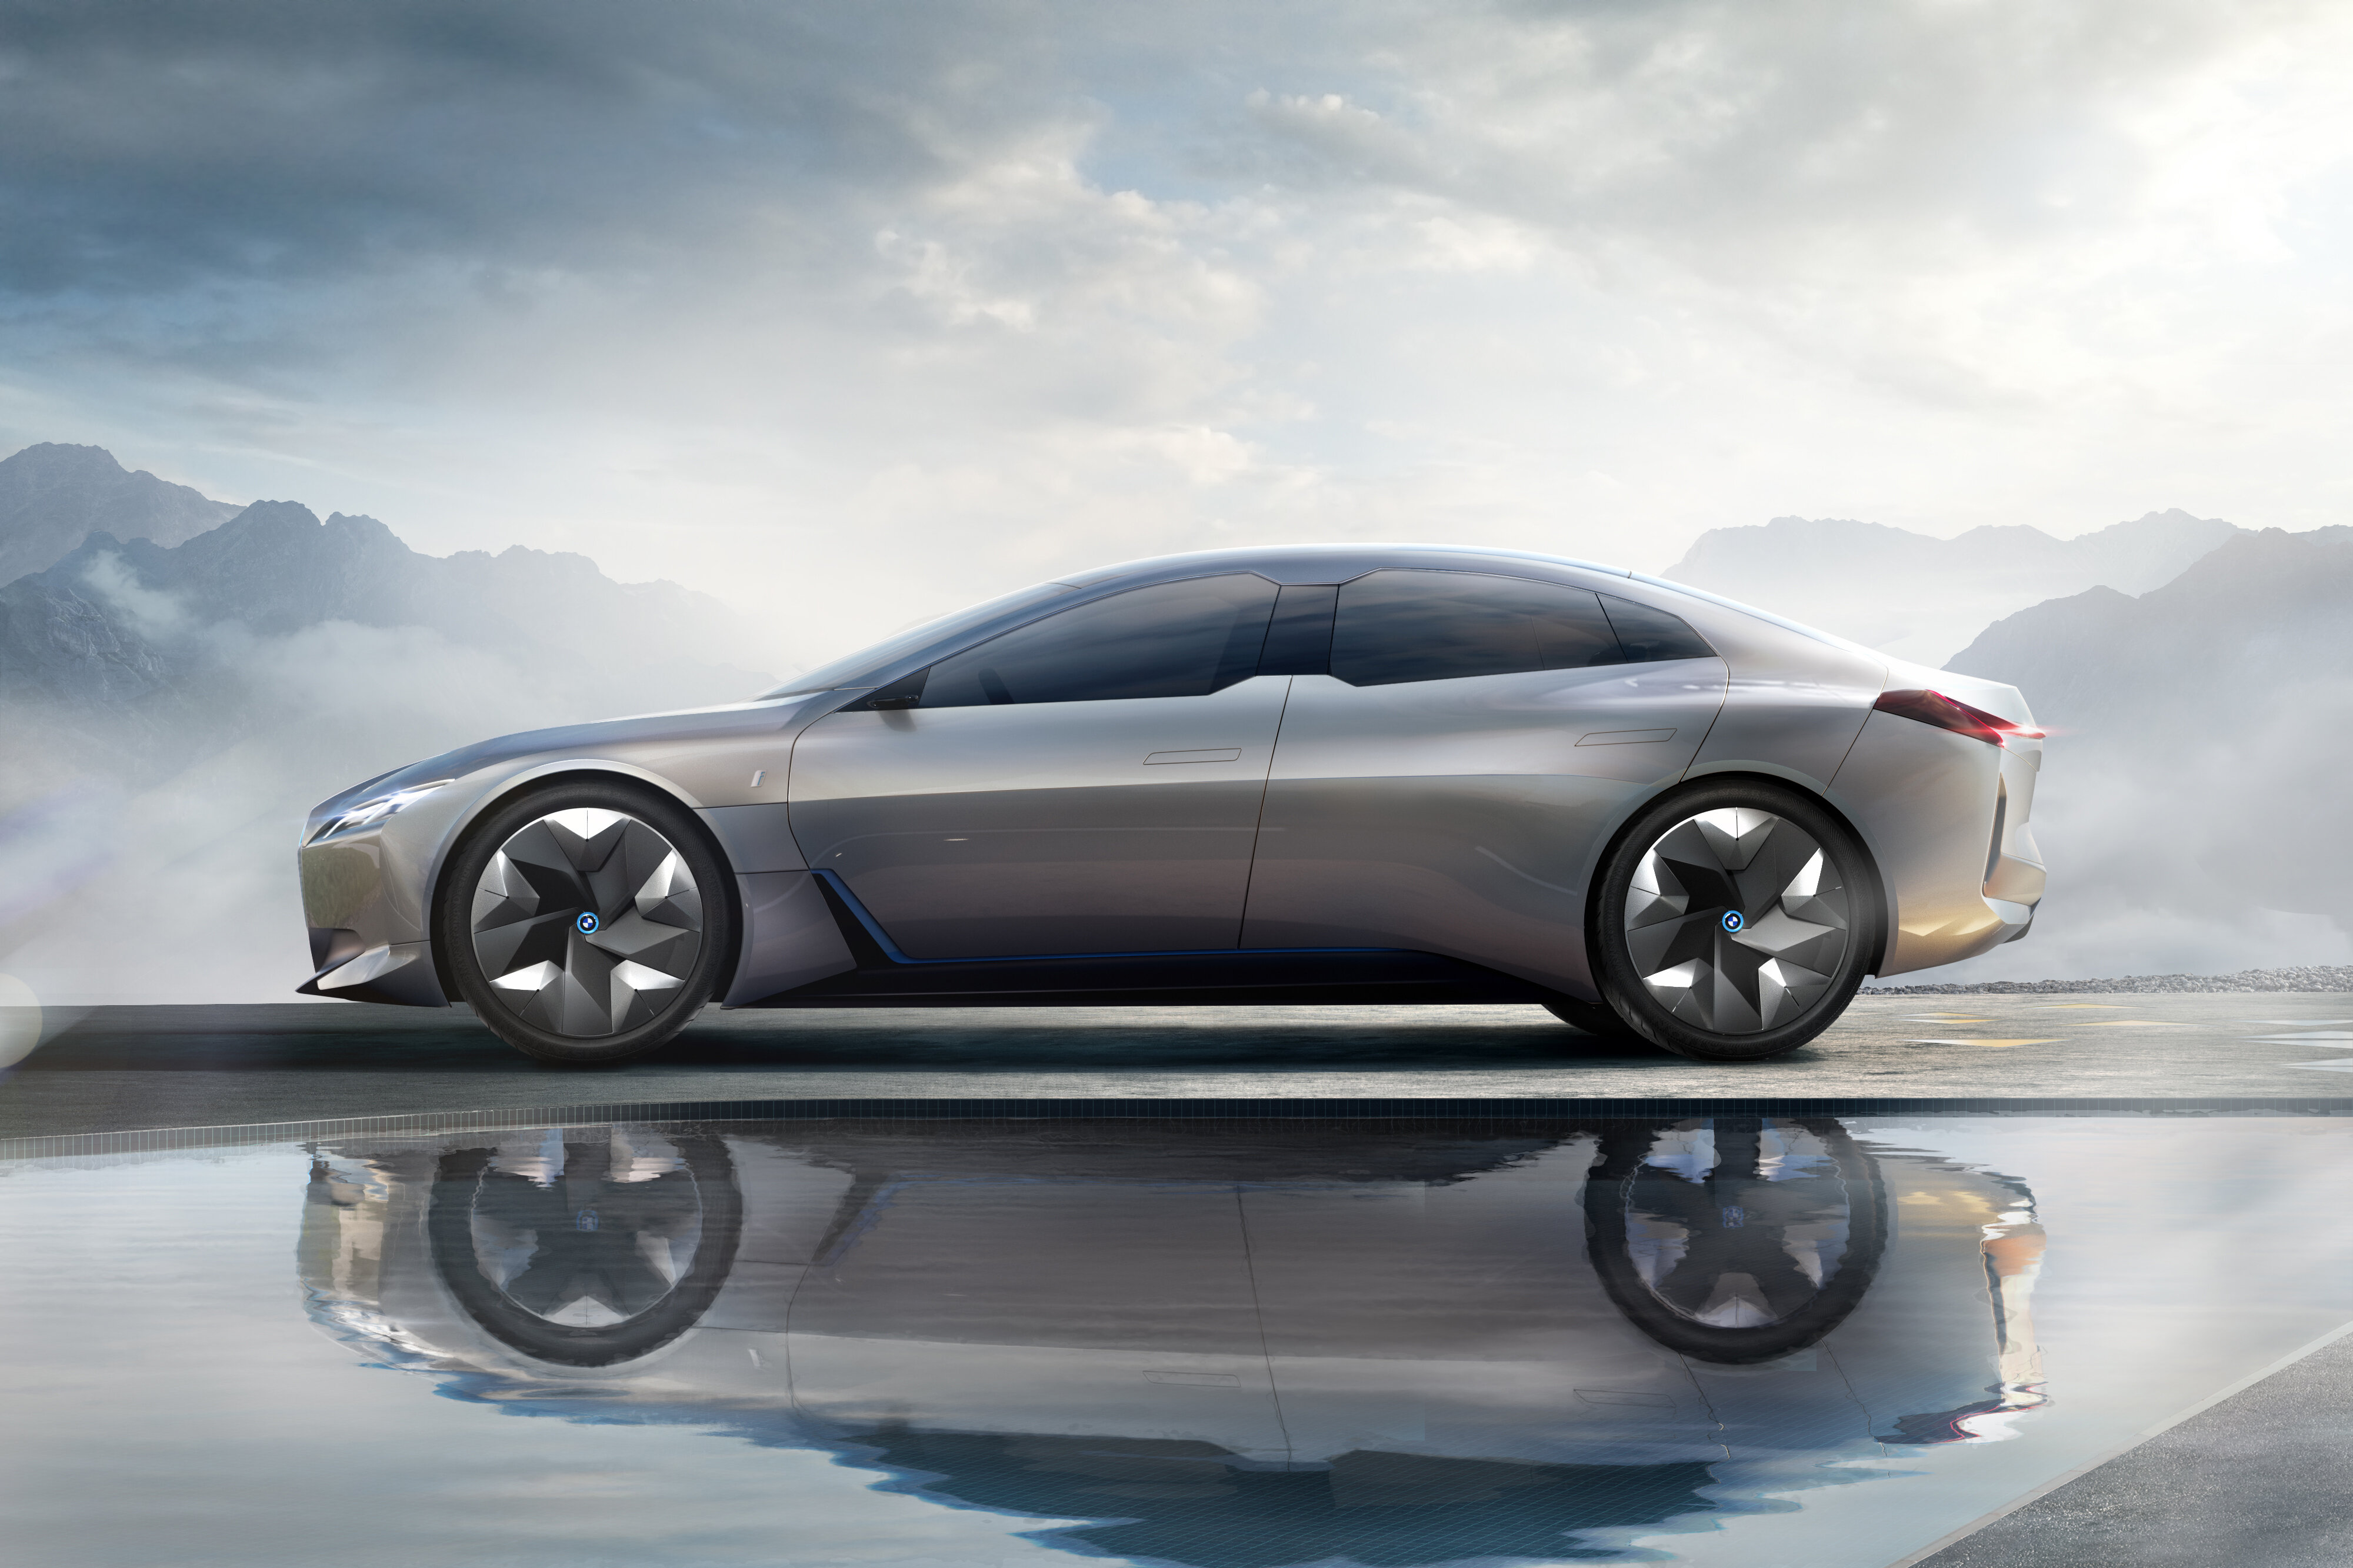 The Future Of Driving: The 2020 BMW I4 Concept